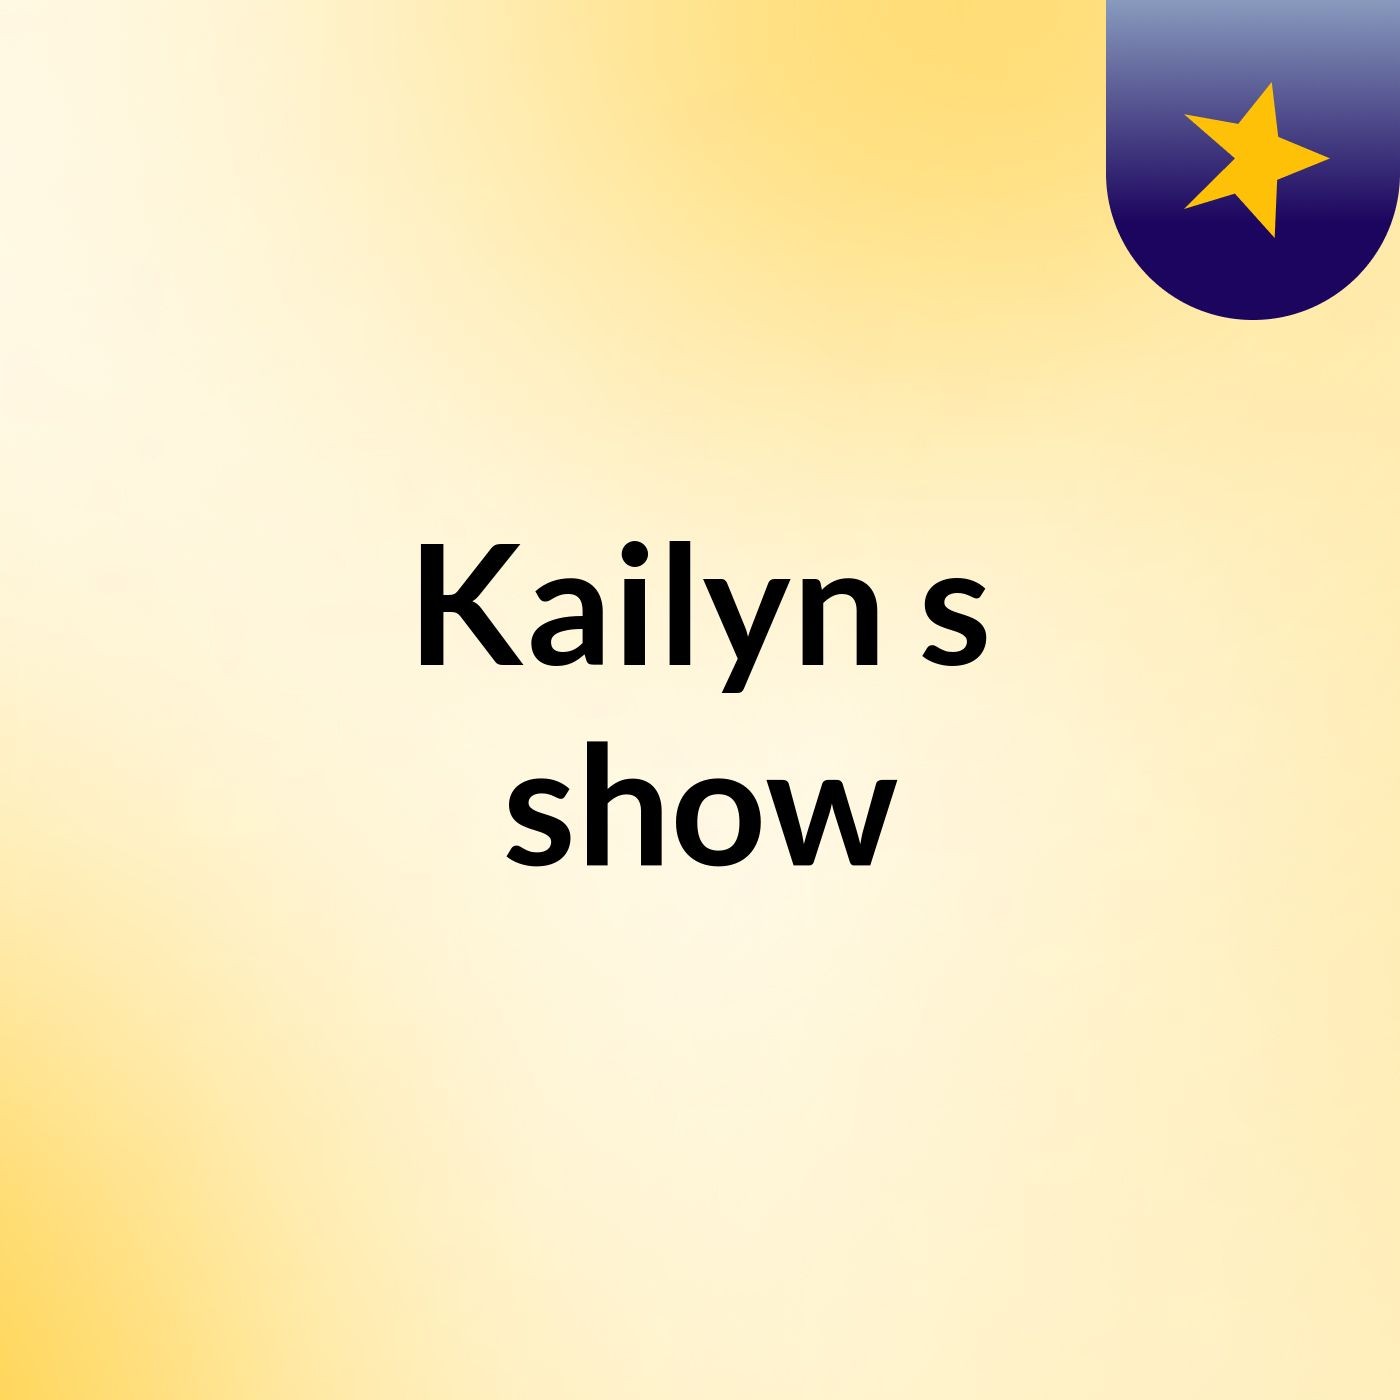 Kailyn's show